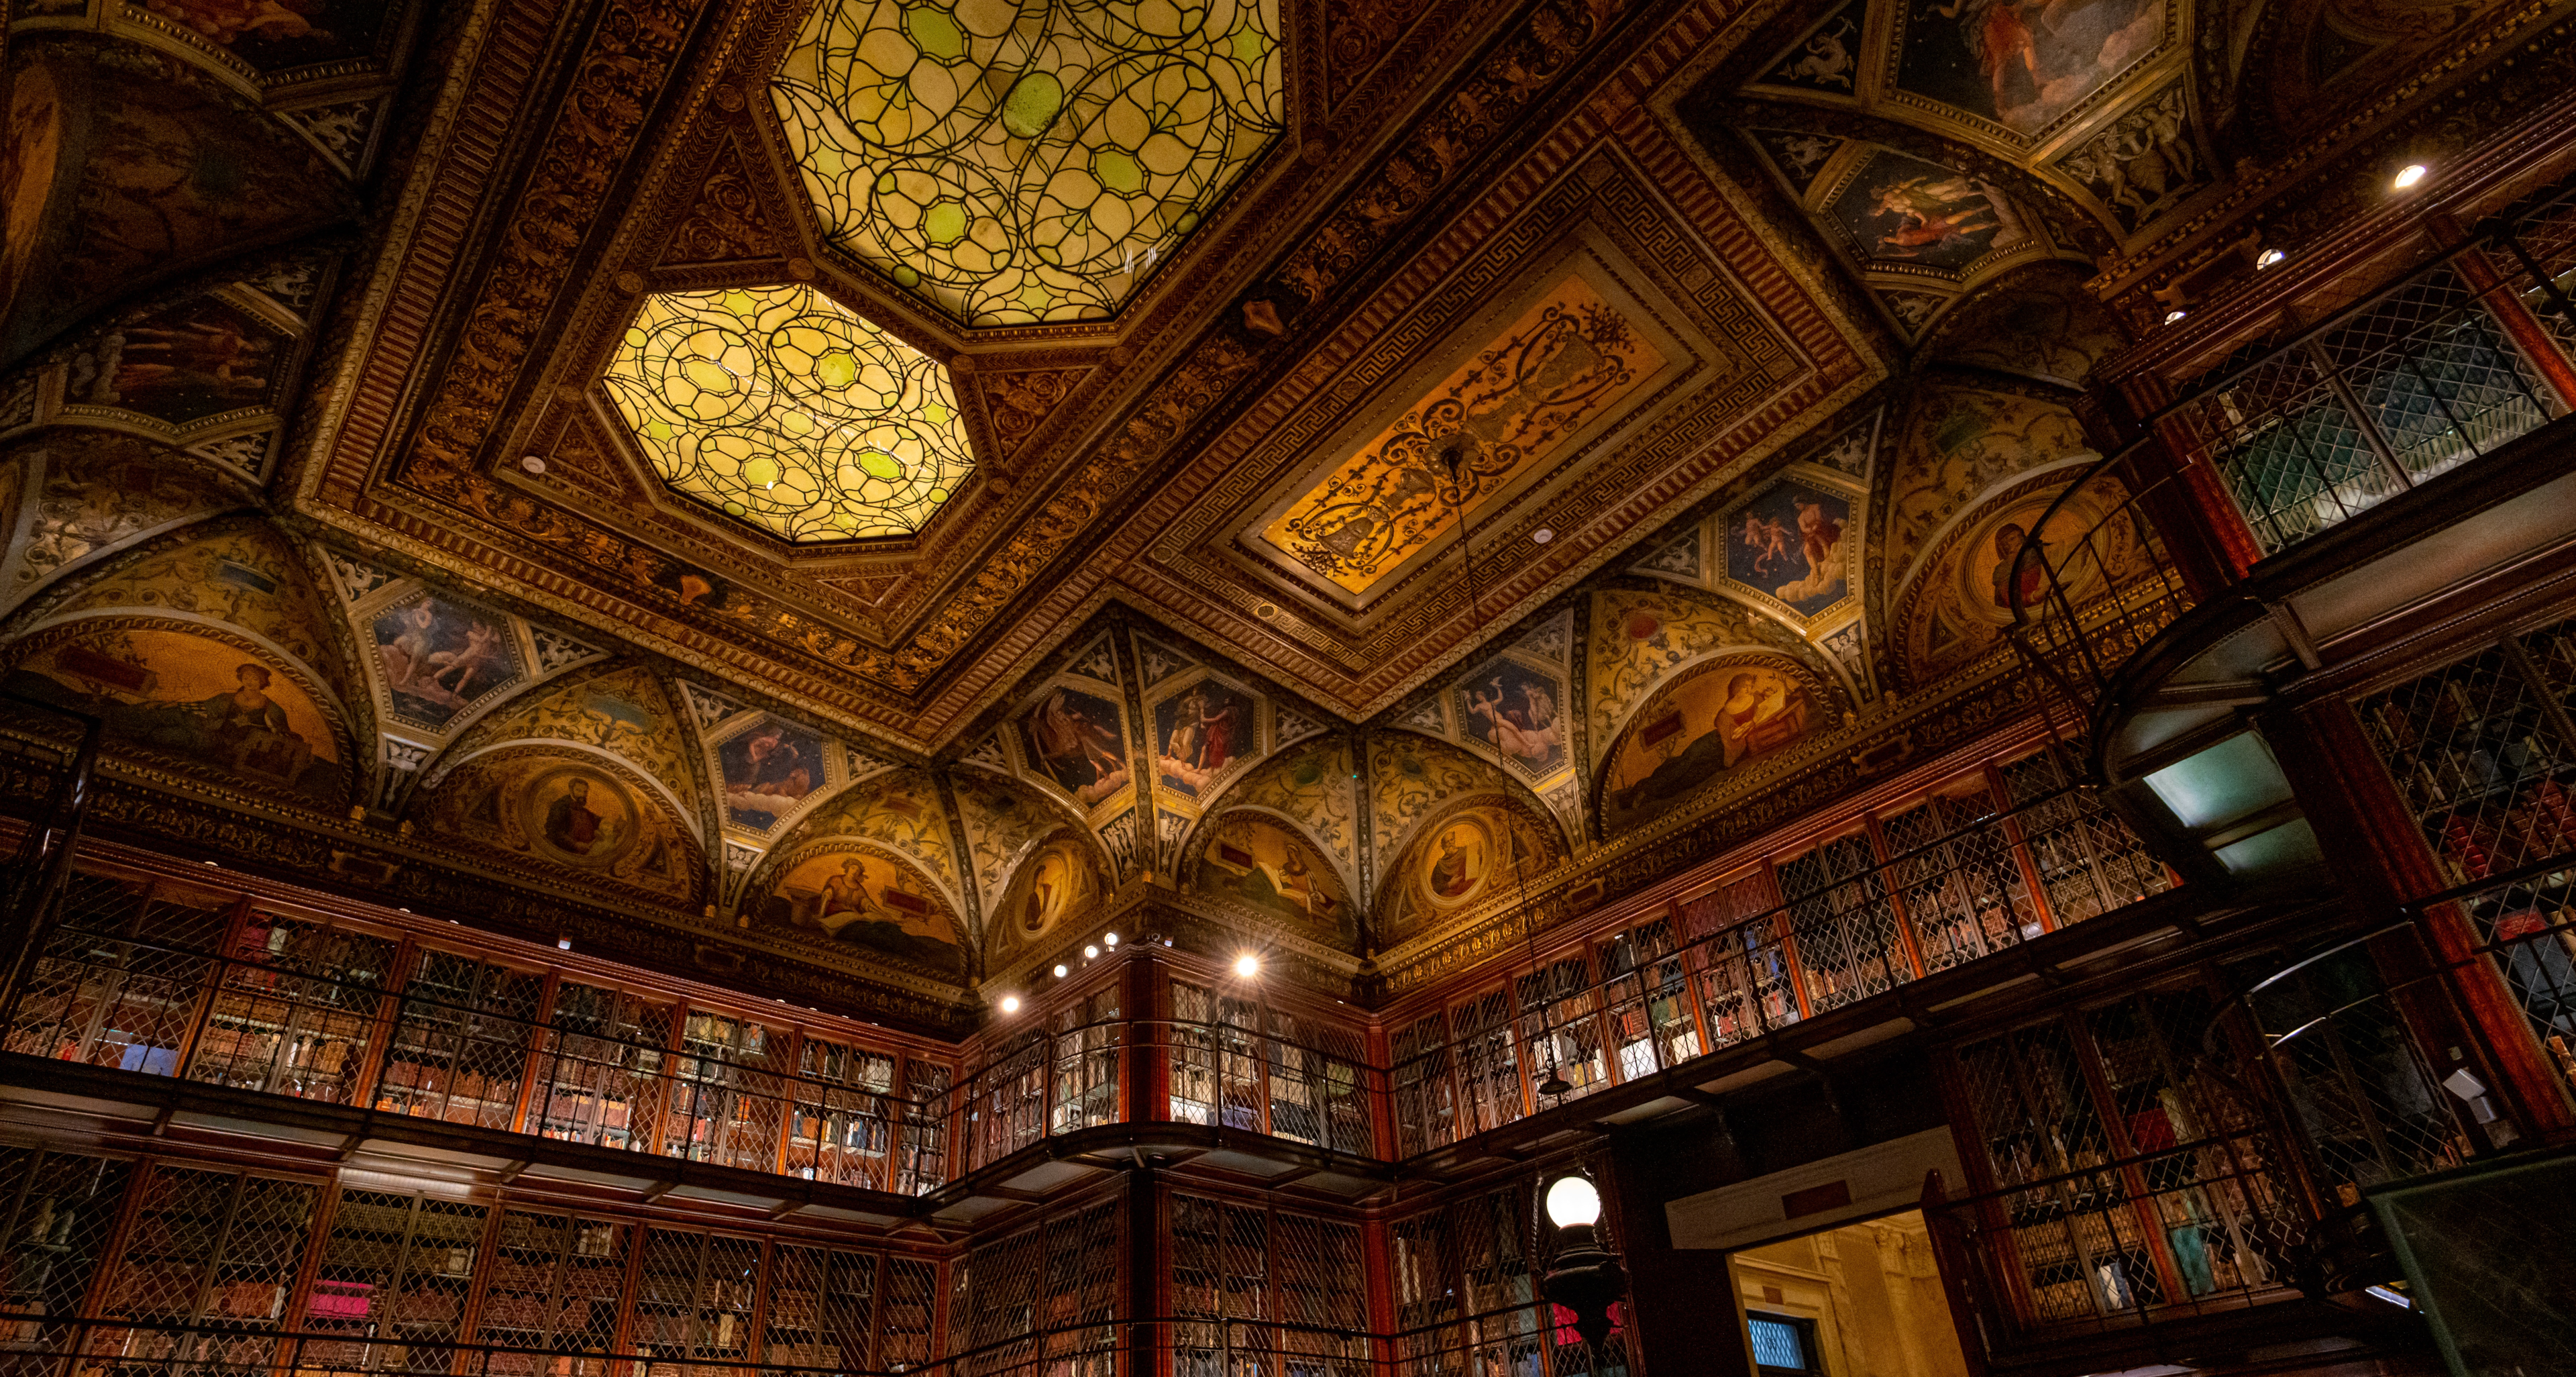 The interior of the Morgan Library & Museum